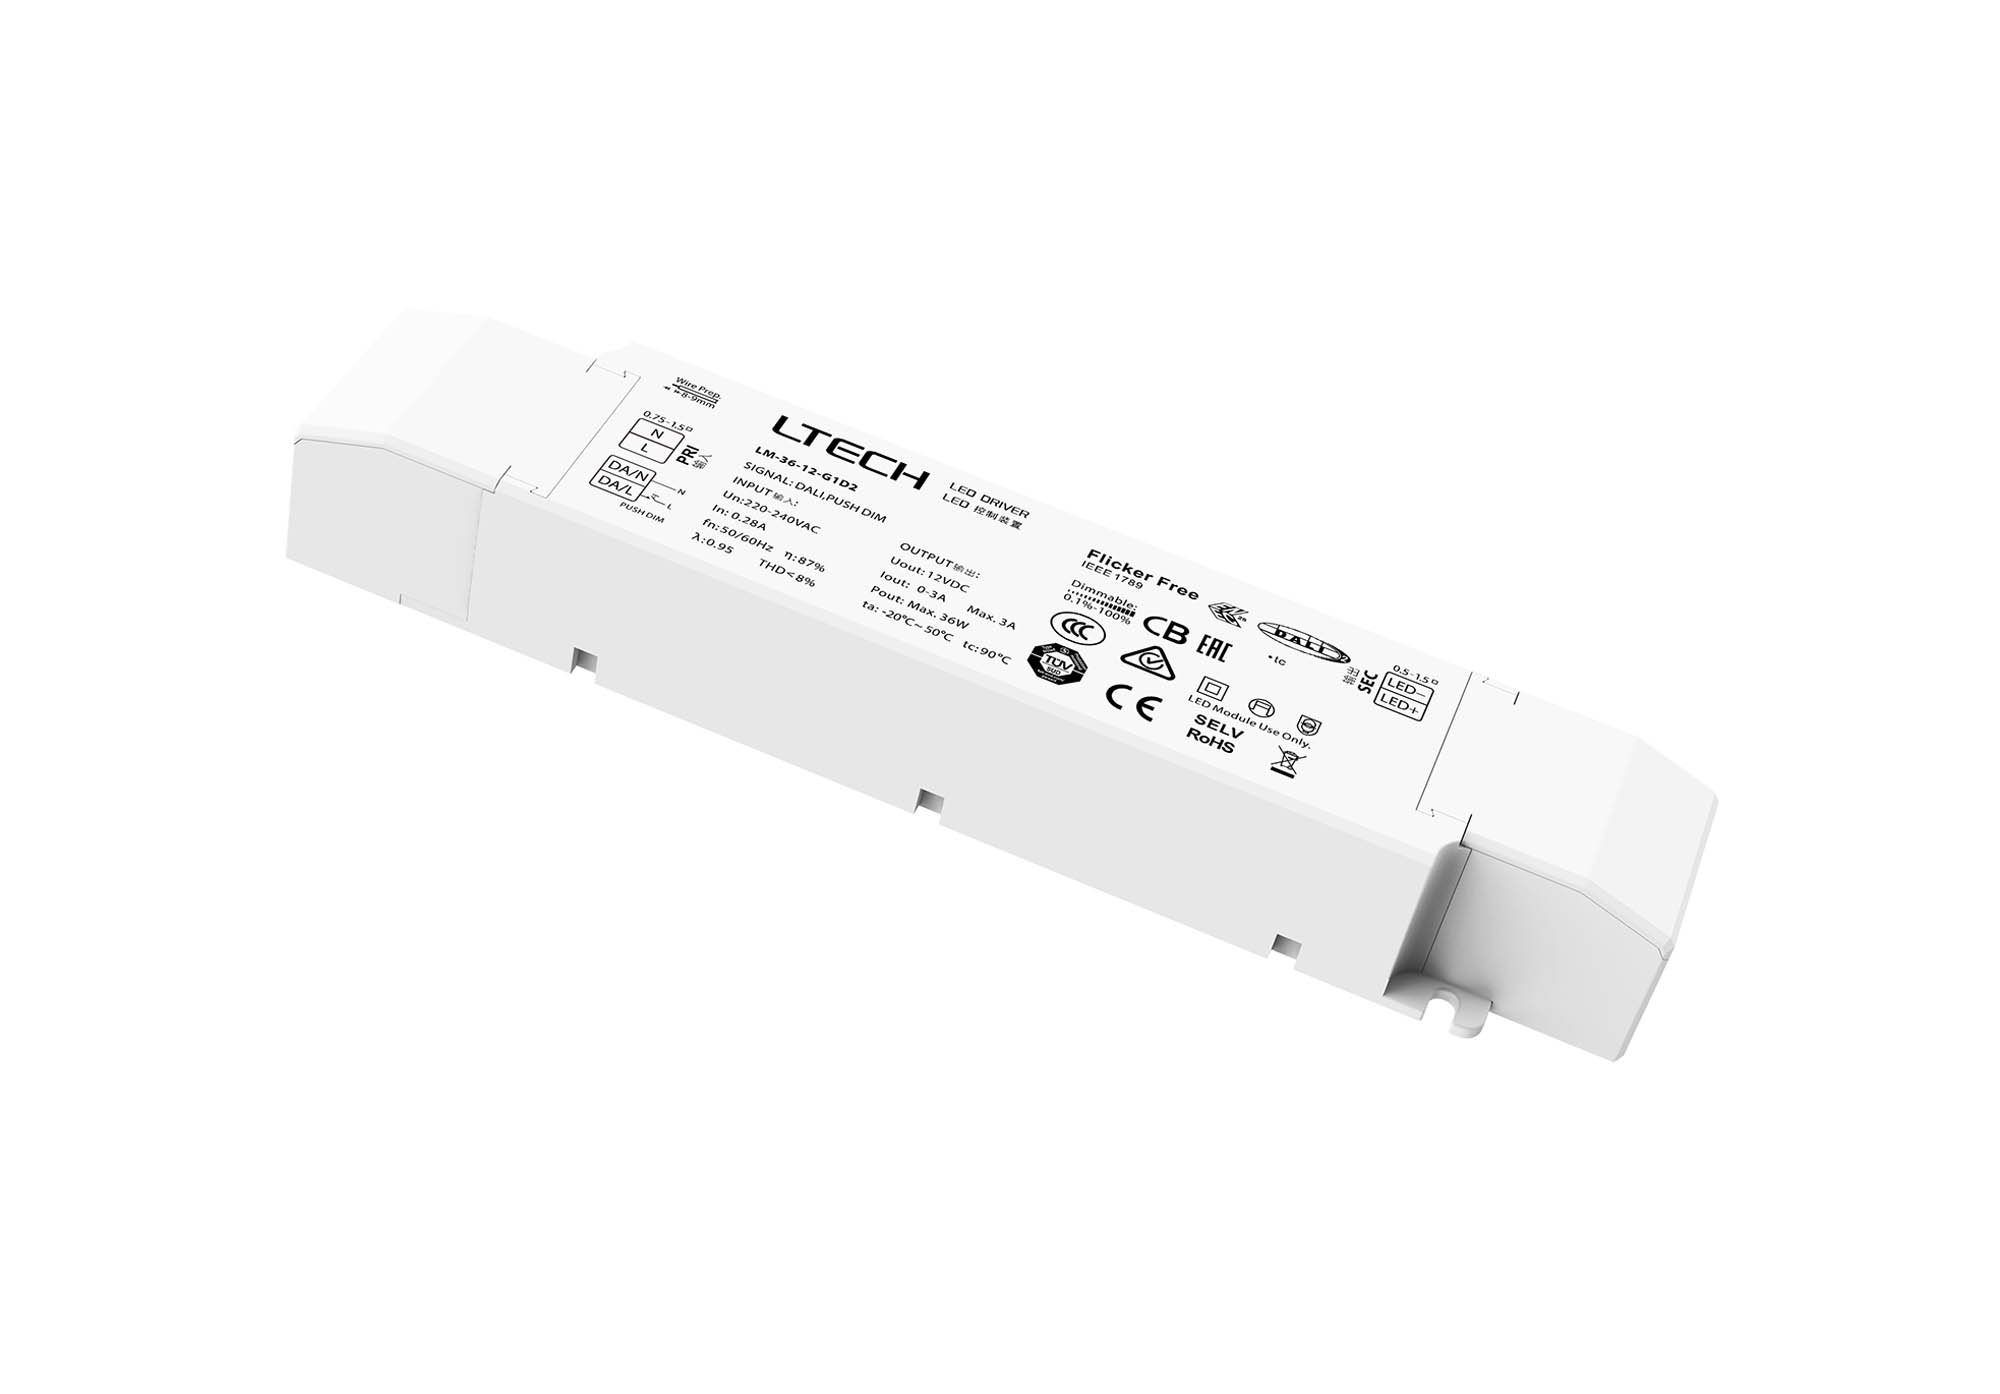 LM-36-12-G1D2  DALI; Push Dim; PWM; 36W; C. Voltage Linear Dimmable Driver; 12V; Max Current Output: 3A; EFF>91.5%; 5yrs Warranty.